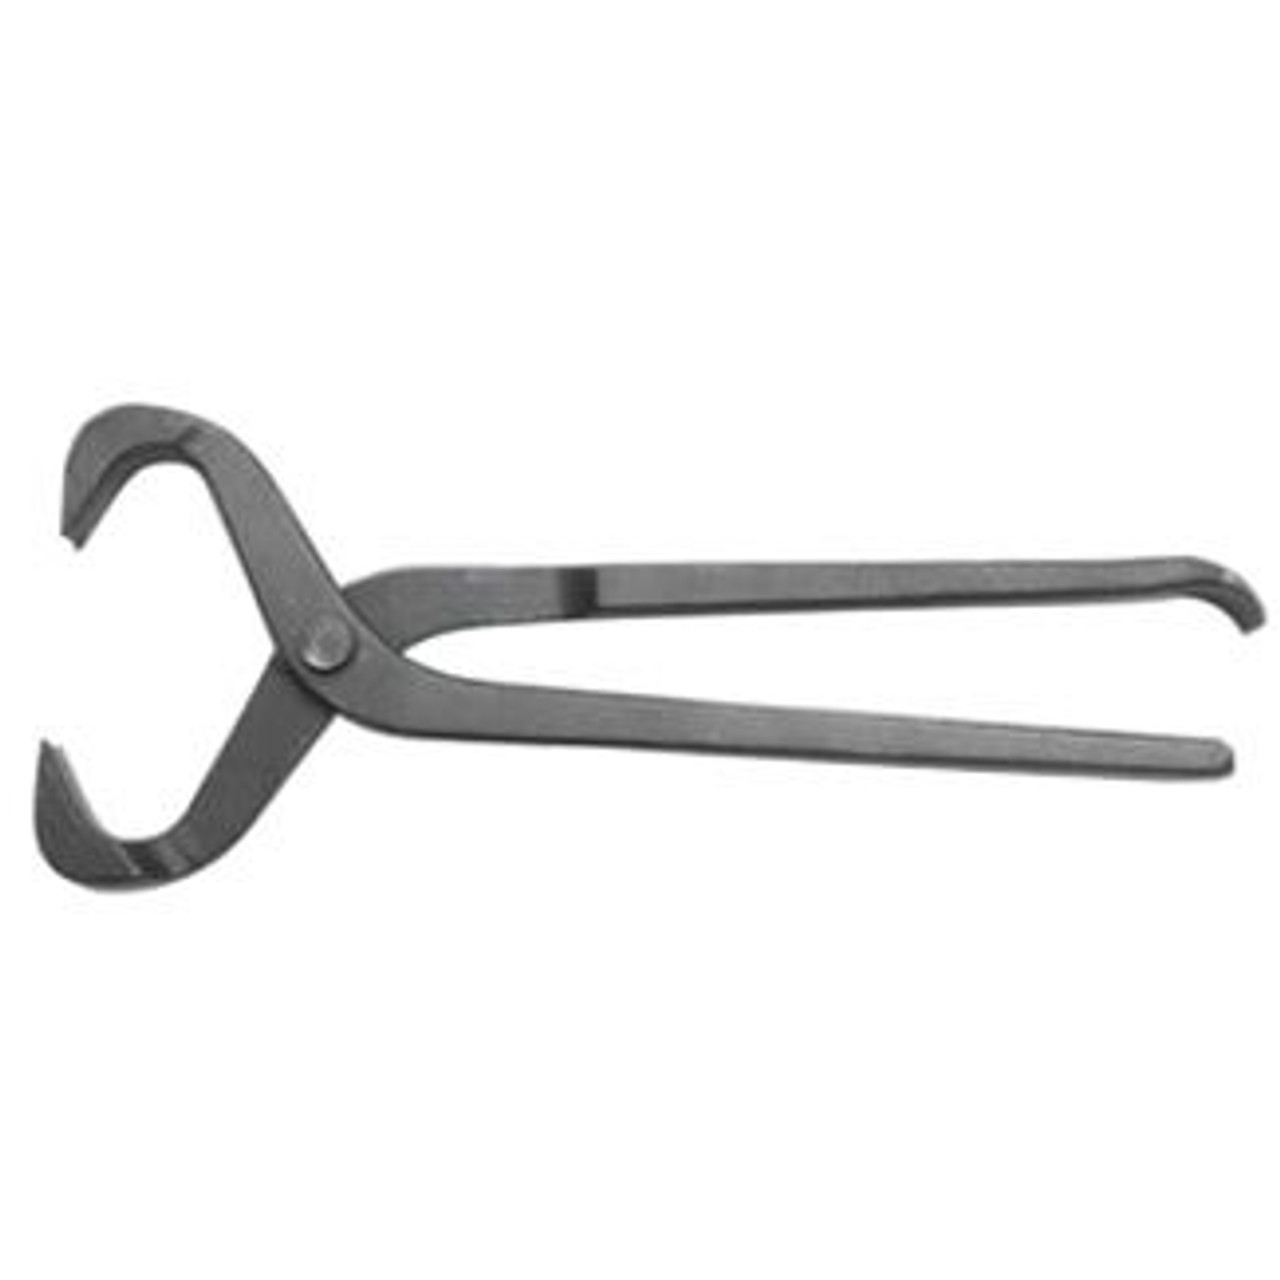 Hub and Dust Cap Pliers